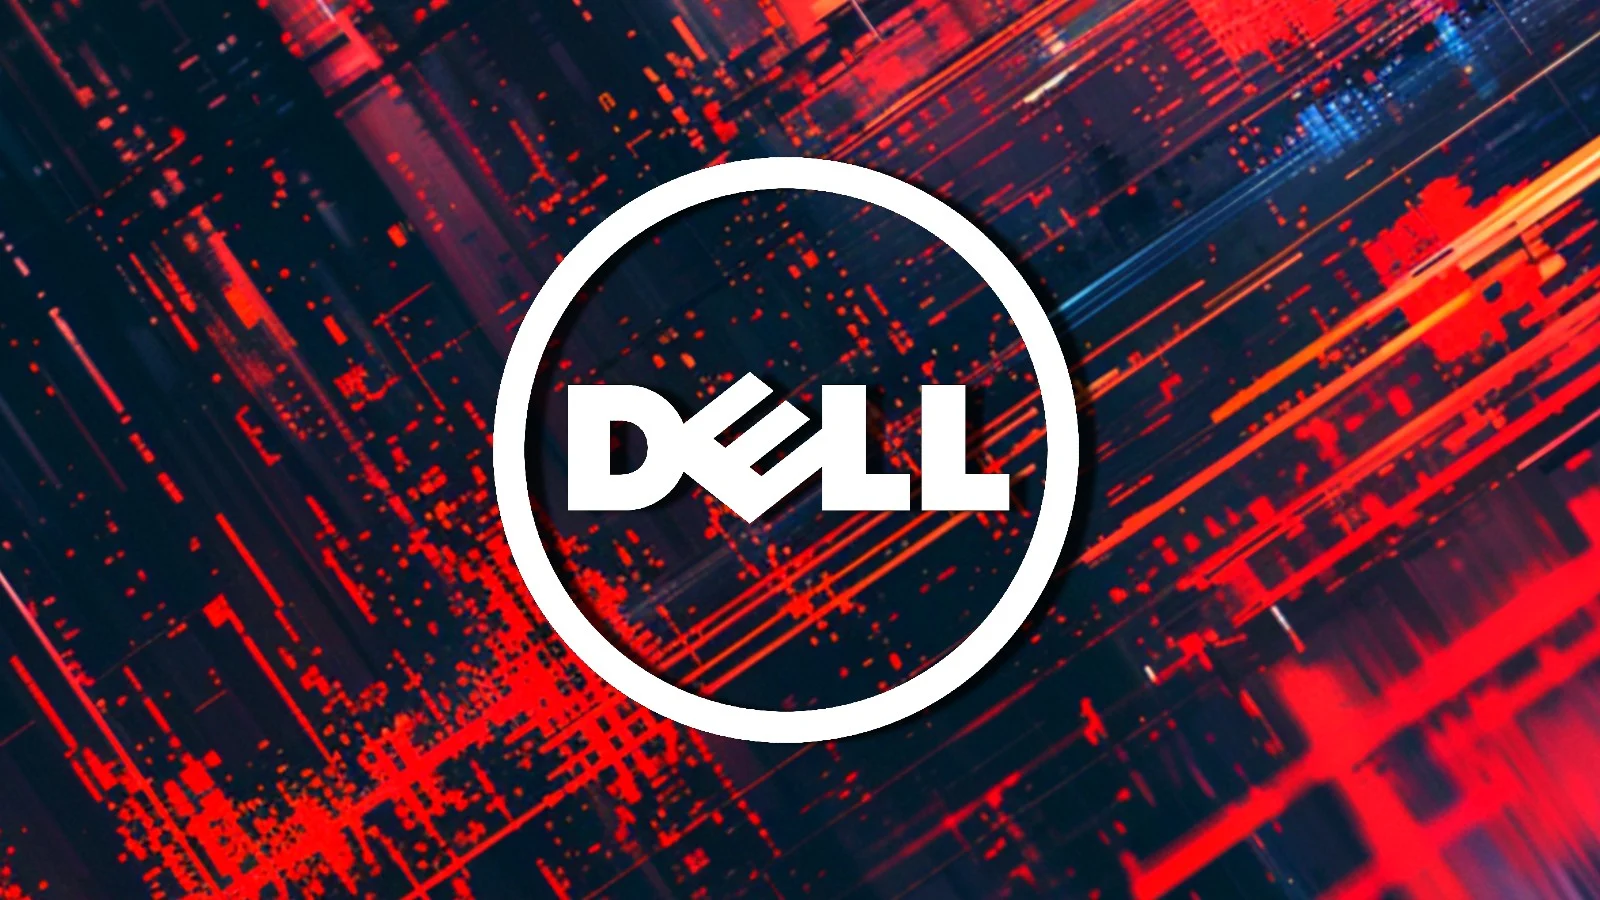 Dell Has Issued a Warning Regarding a Data Breach That Has Reportedly Impacted Approximately 49 Million Customers.